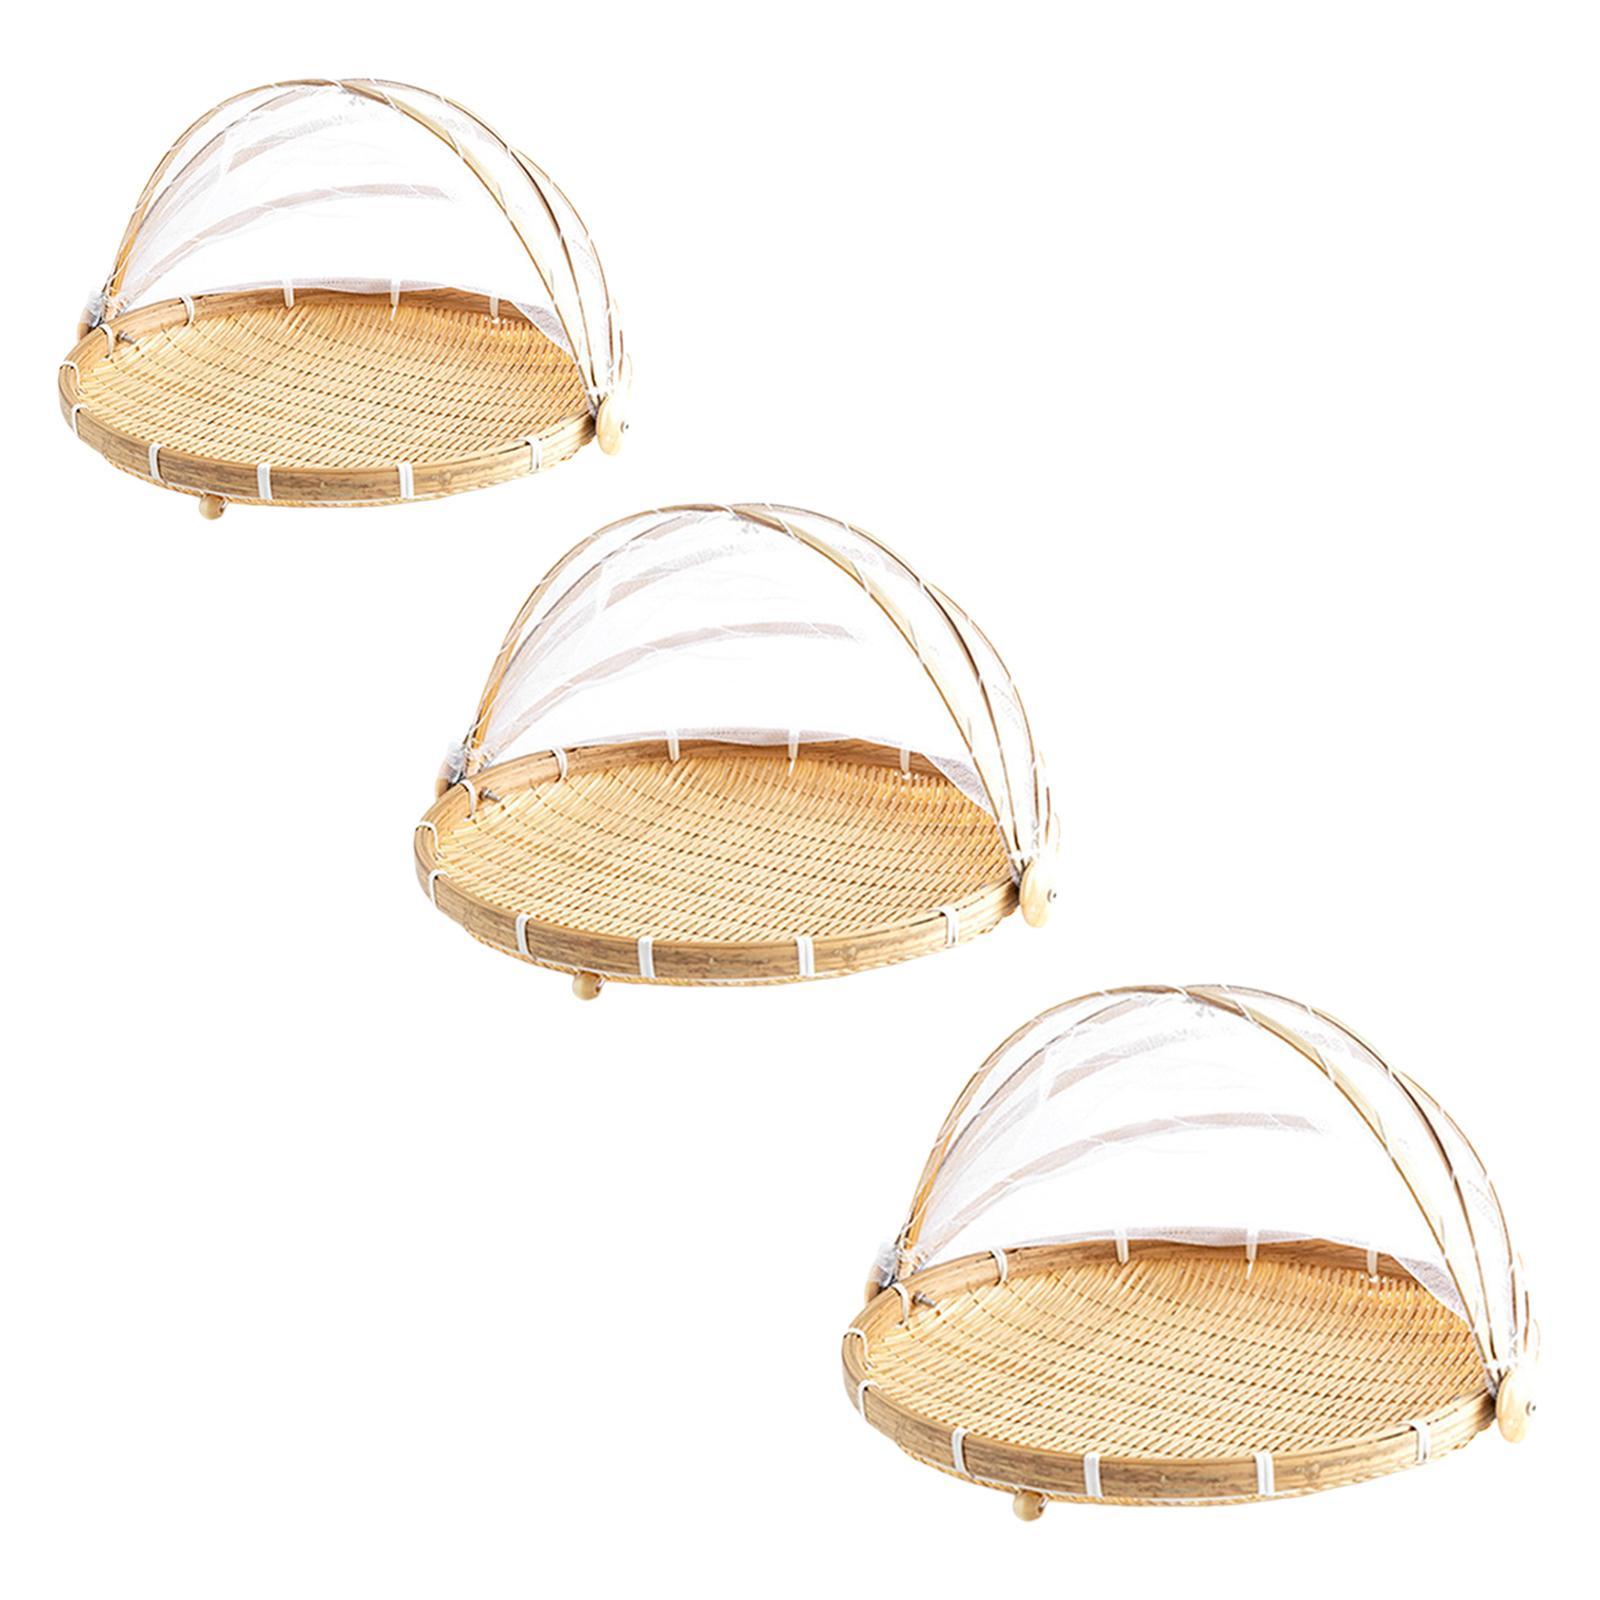 Bamboo Food Serving Tent Basket Fruit Bowls Handmade for Rustic Outdoor